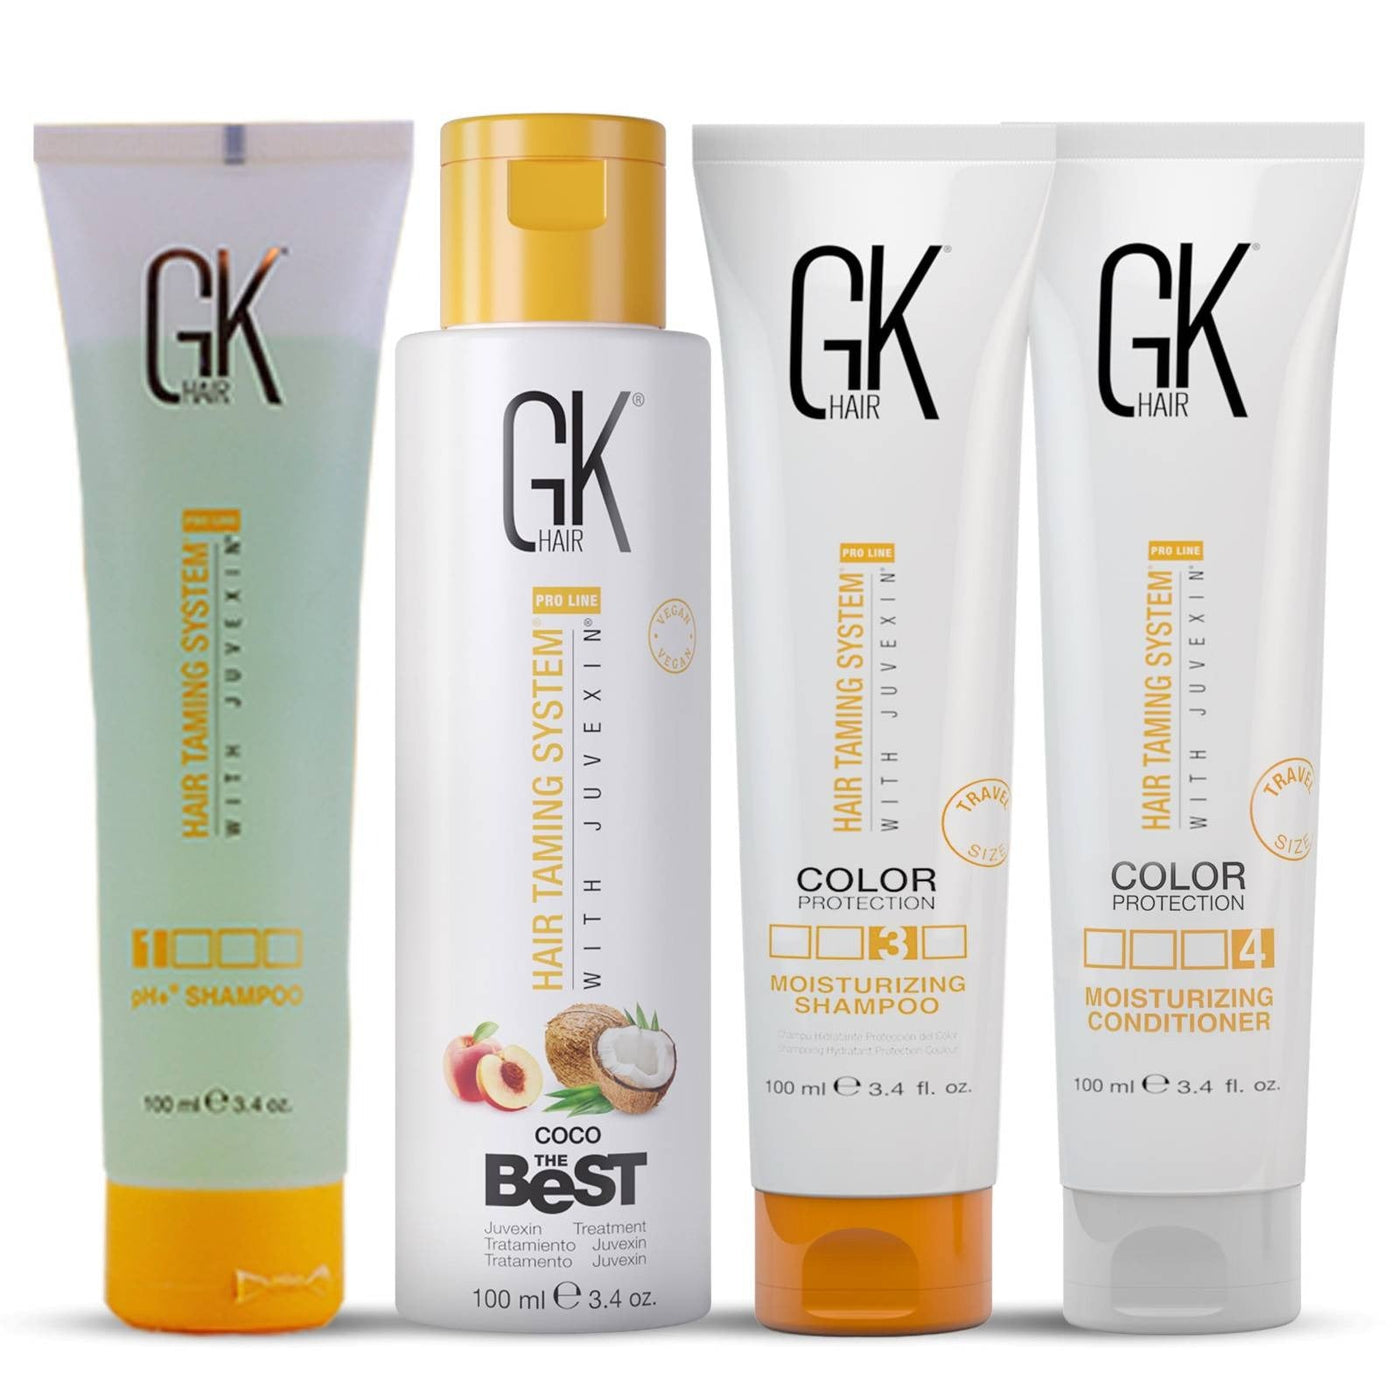 The Best Coco Keratin Professional Hair Kit